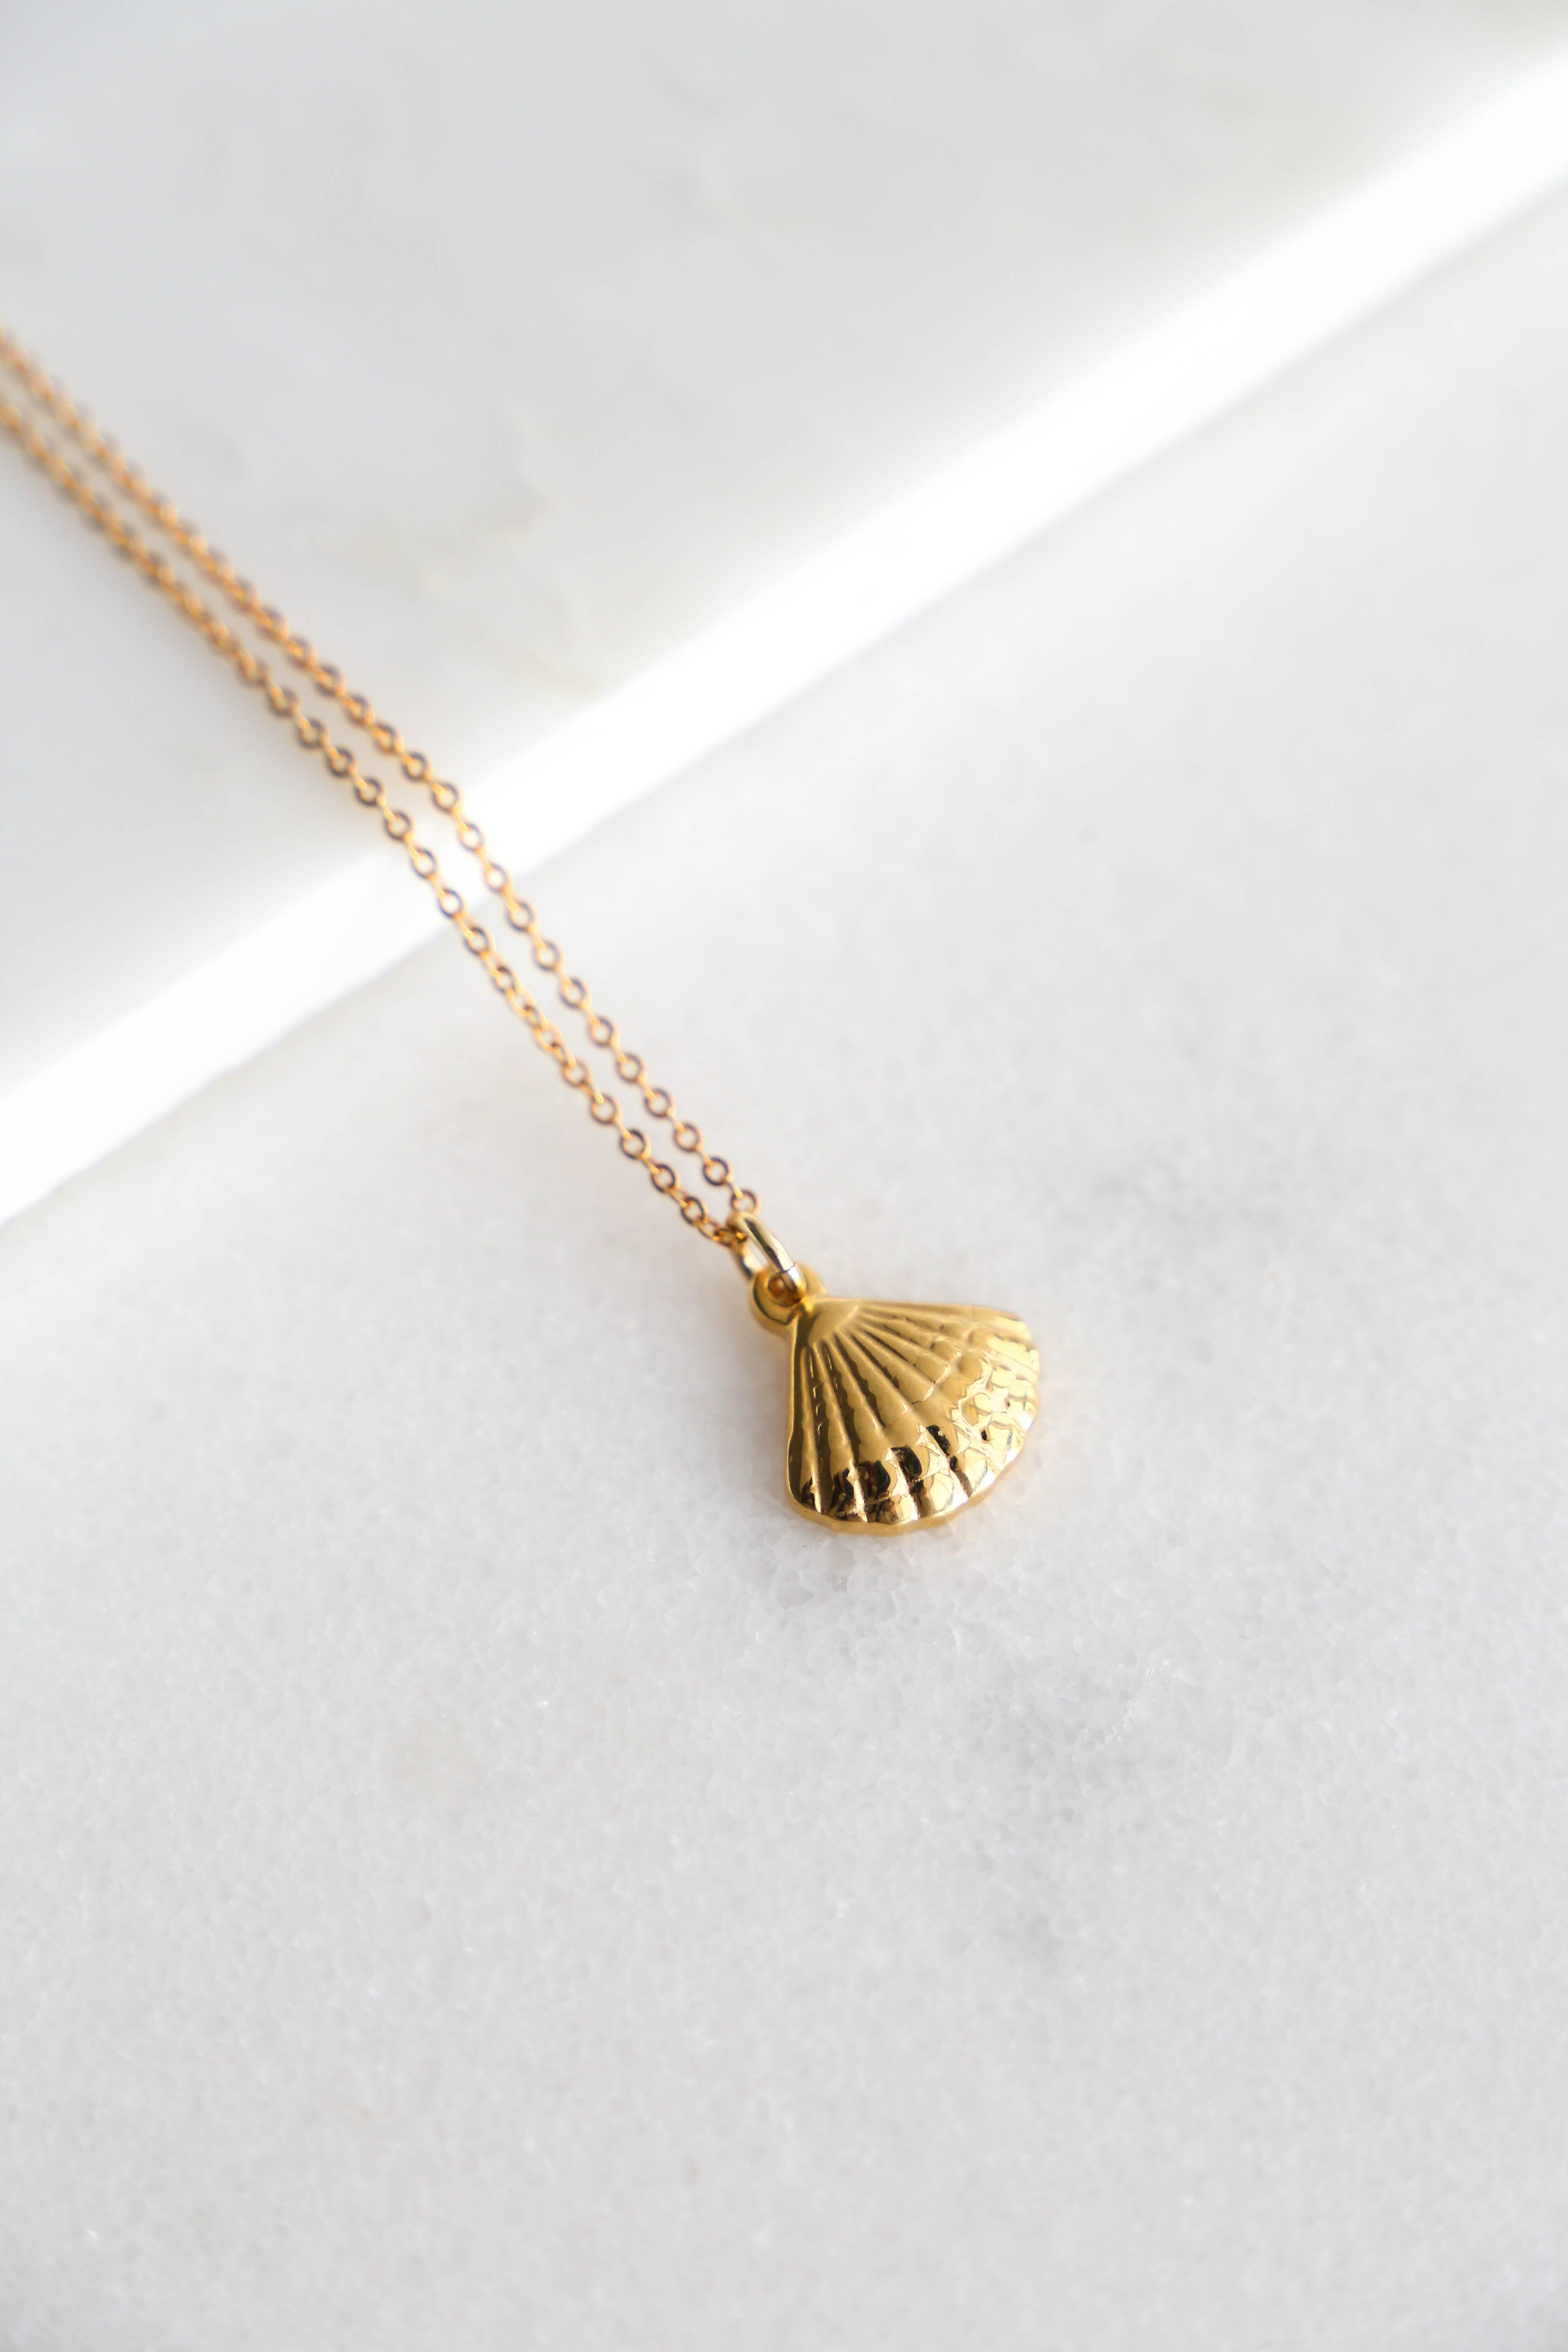 La Mer Necklace - Boutique Minimaliste has waterproof, durable, elegant and vintage inspired jewelry